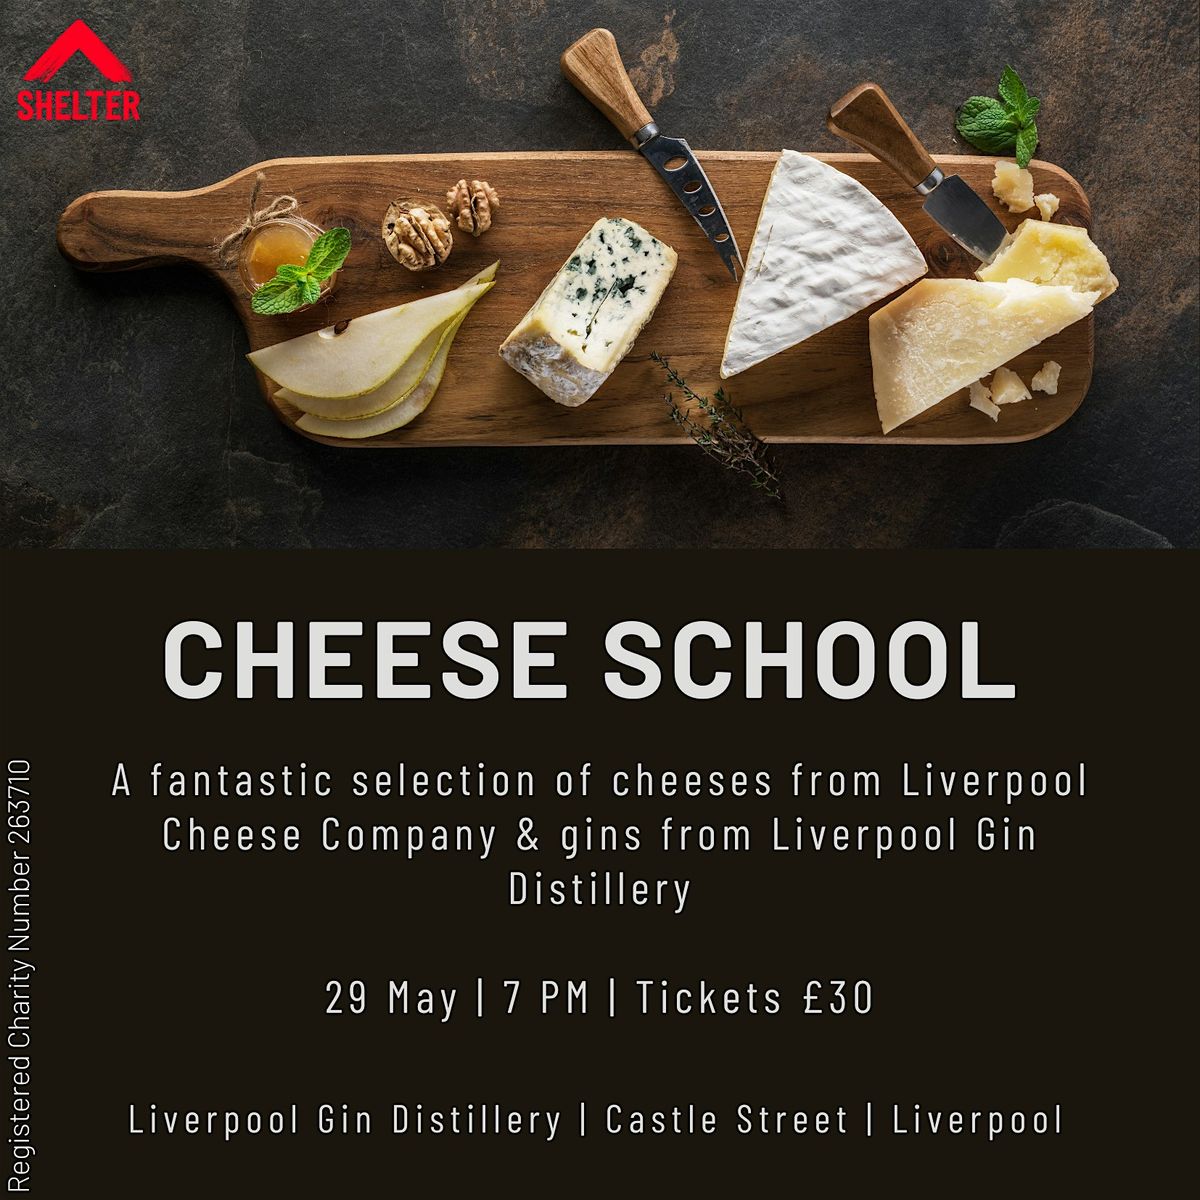 Cheese School at Liverpool Gin Distillery